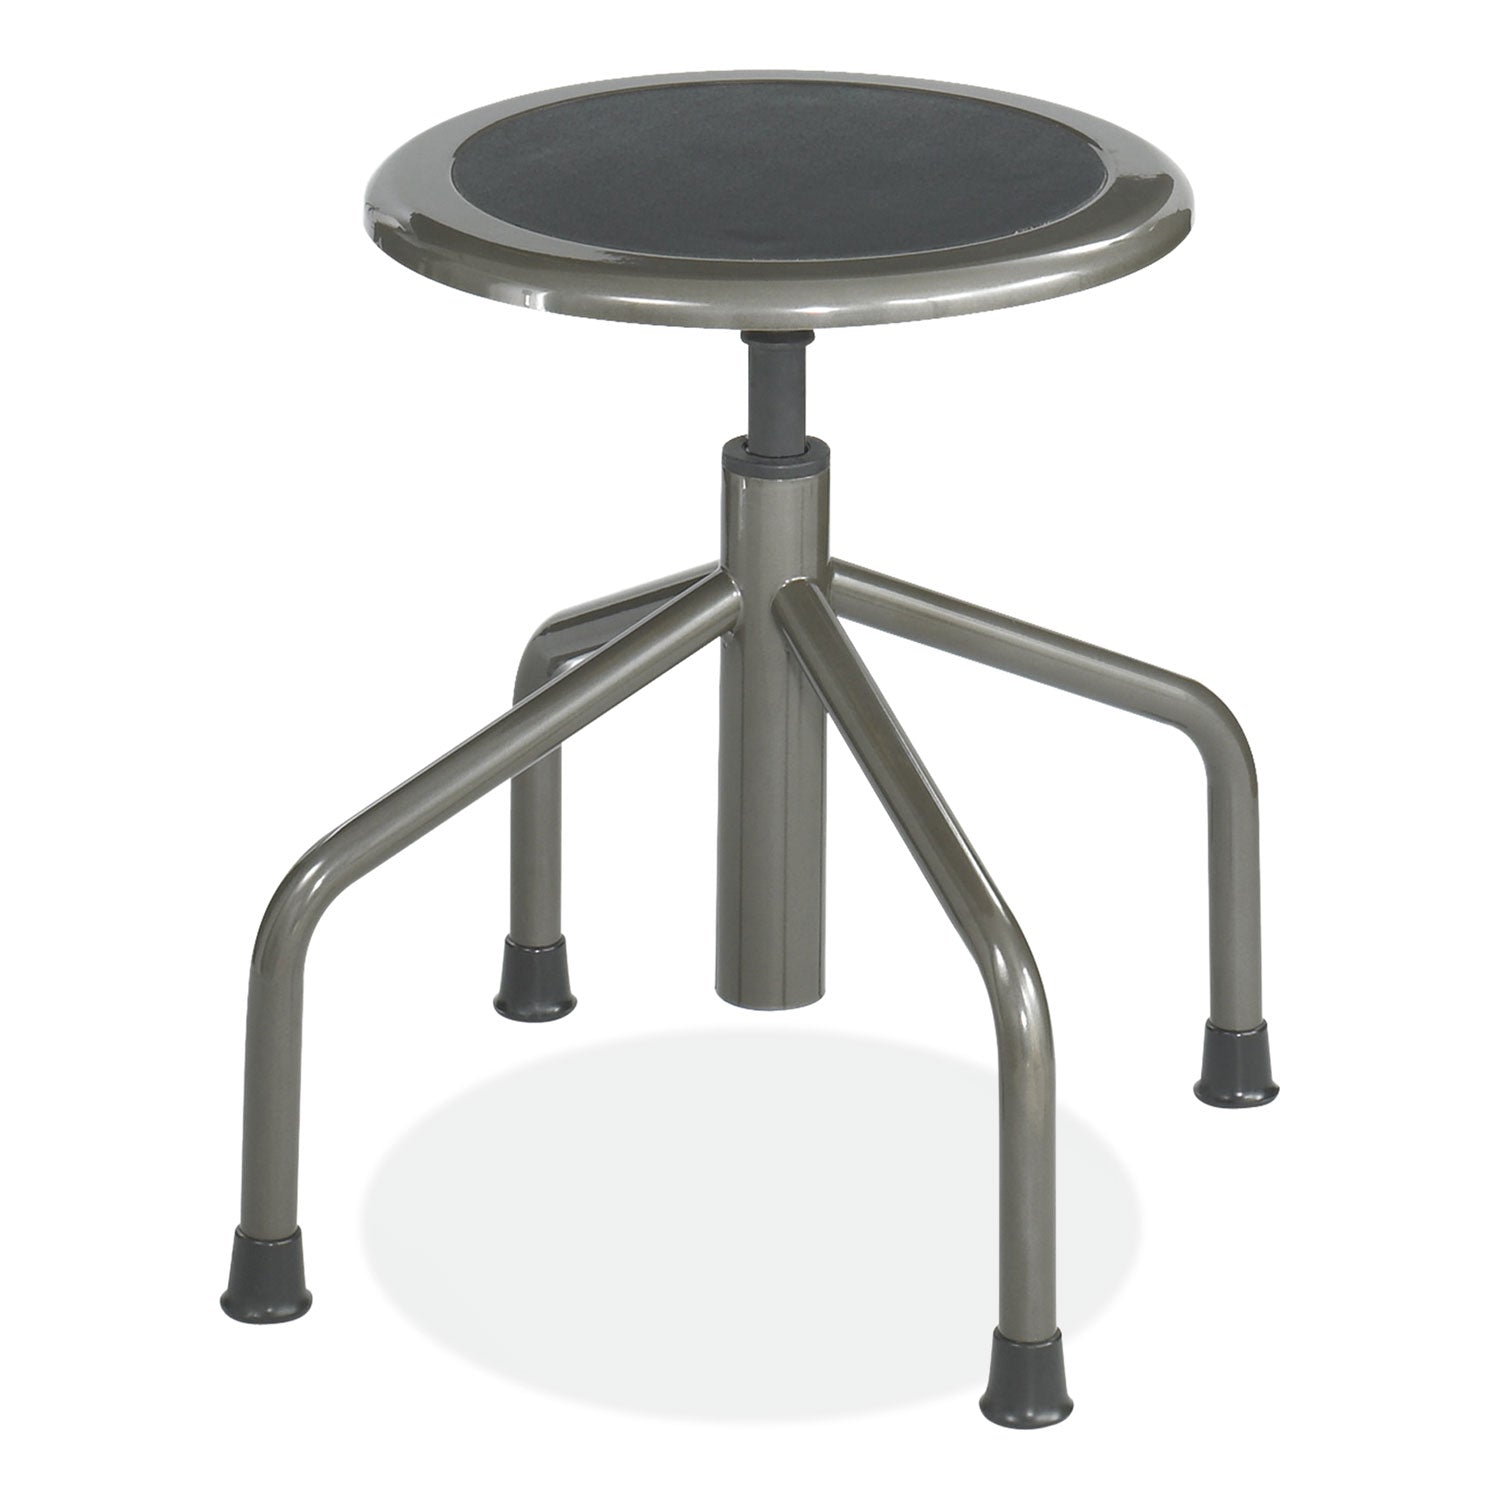 diesel-low-base-stool-backless-supports-up-to-250-lb-16-to-22-high-black-seat-pewter-base-ships-in-1-3-business-days_saf6669 - 1